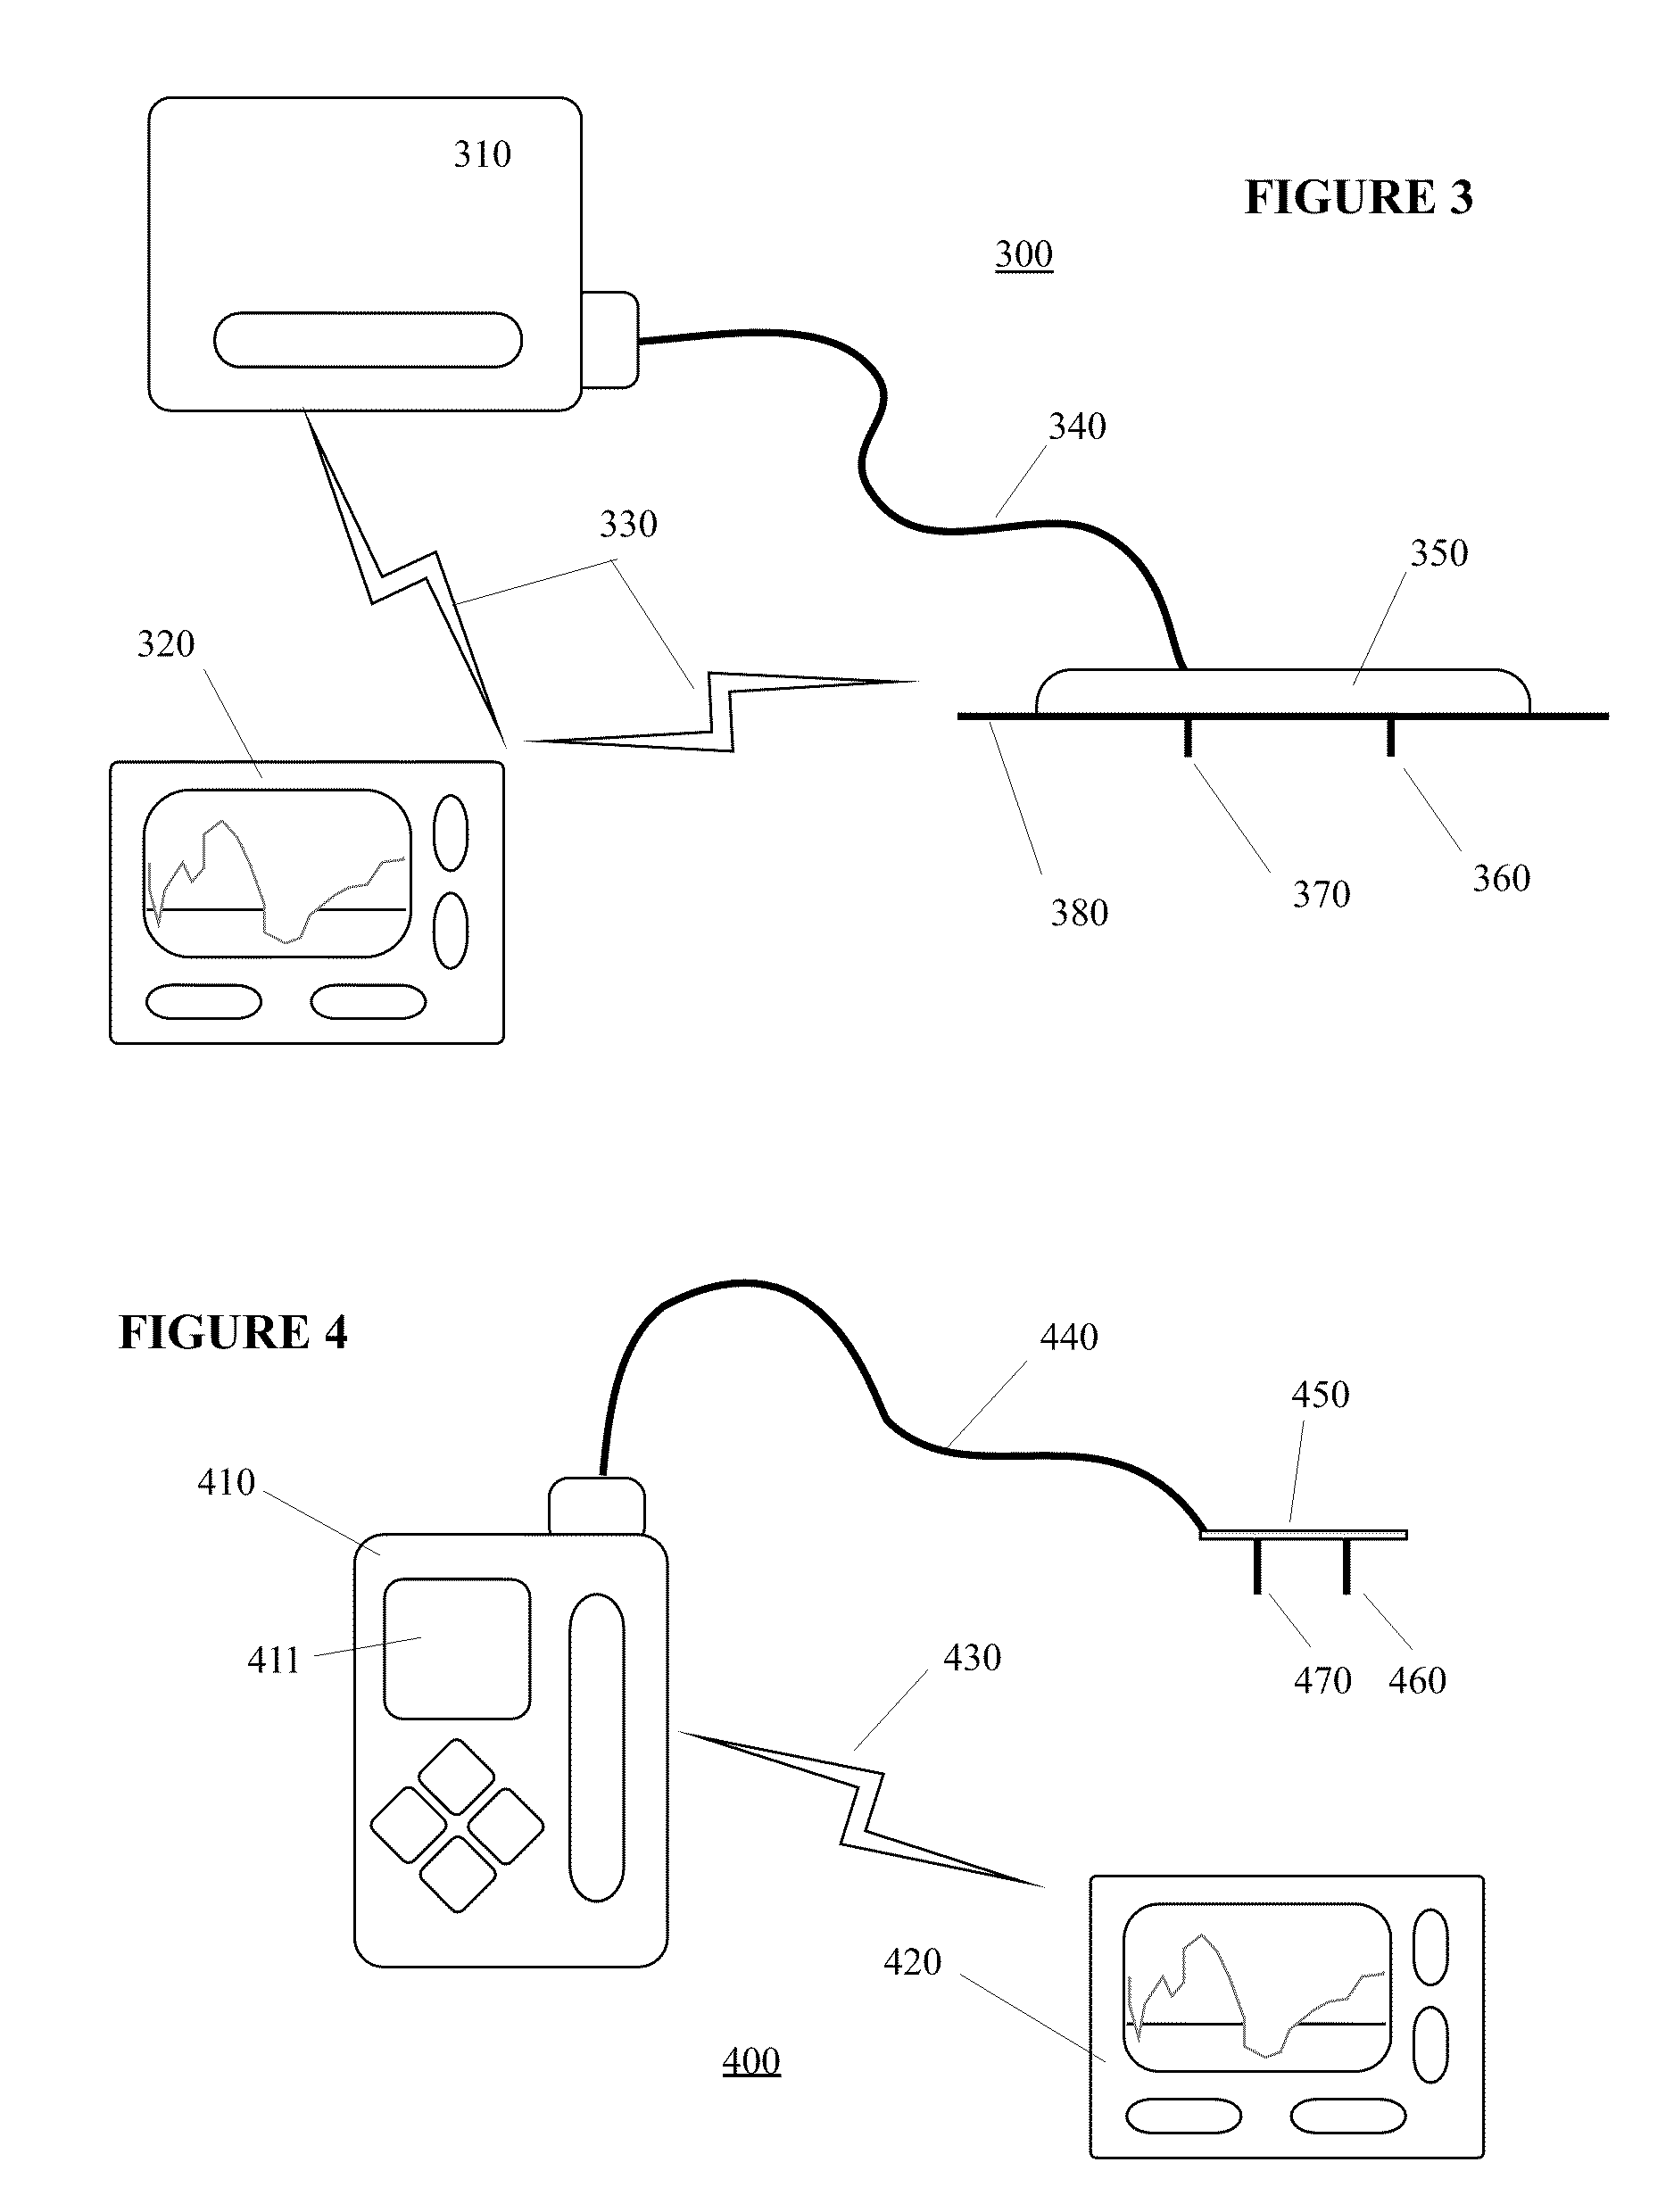 Method and System for Providing Integrated Medication Infusion and Analyte Monitoring System